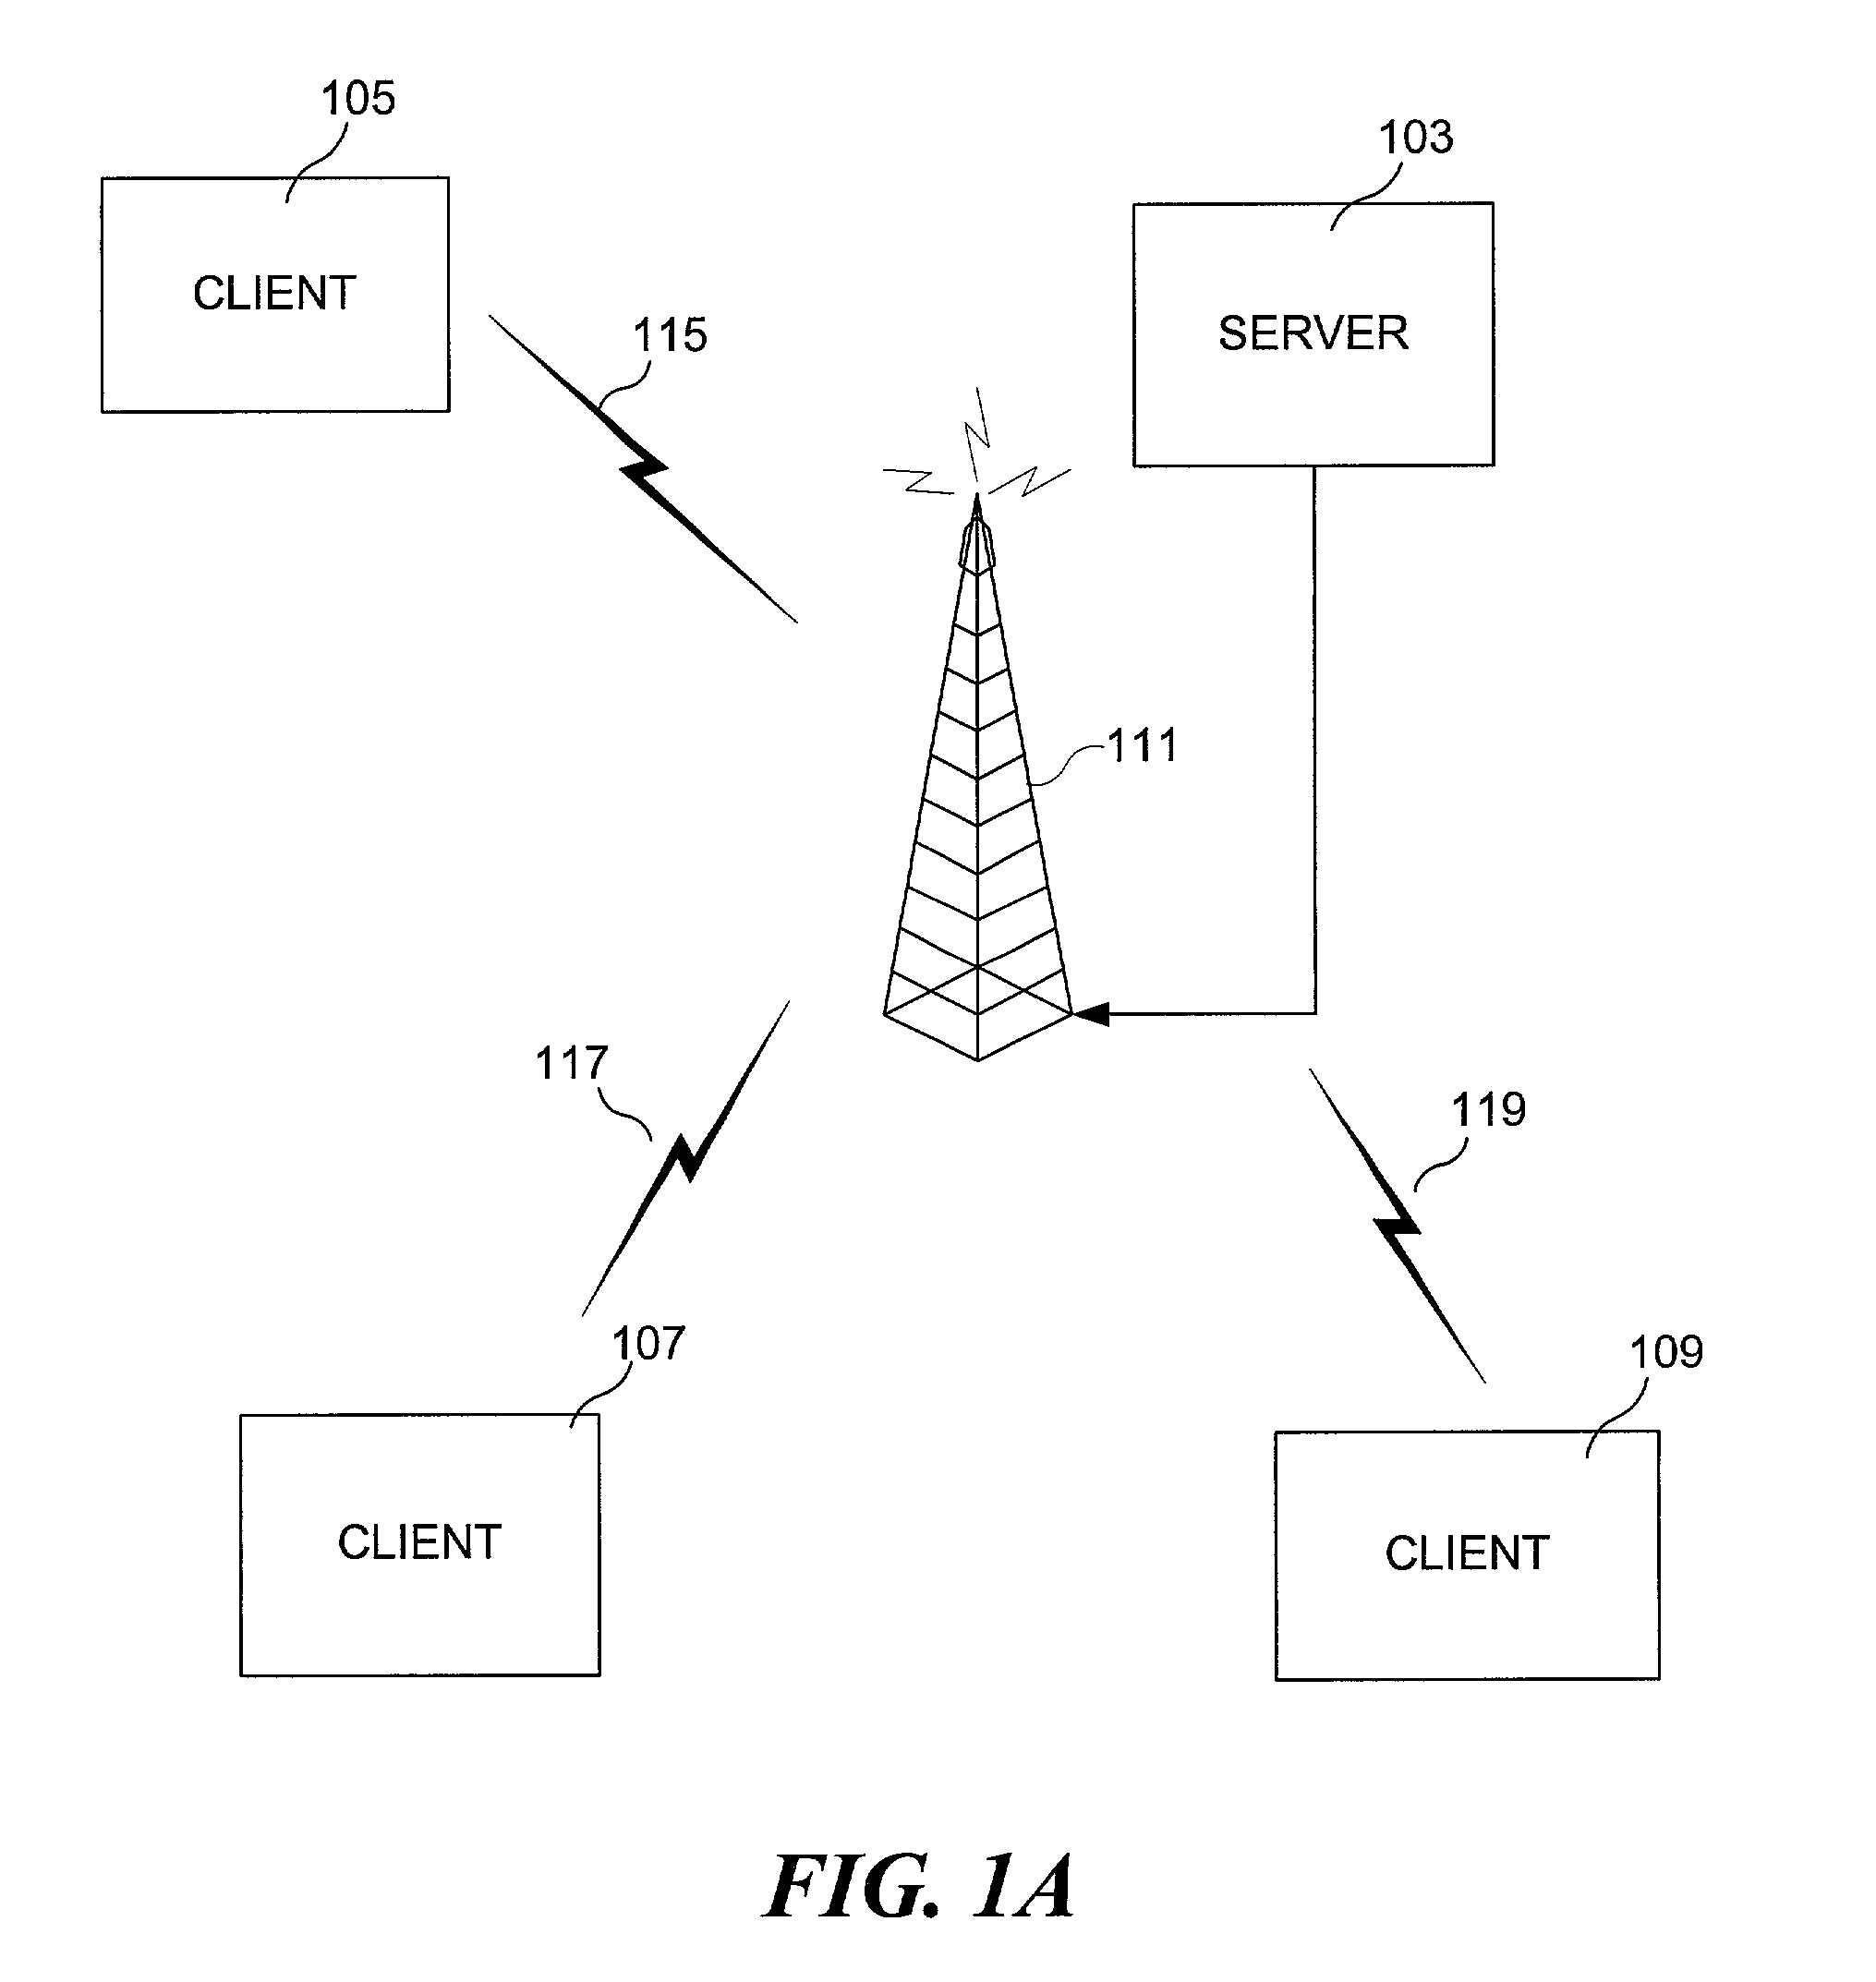 Method and apparatus for continuously and opportunistically driving an optimal broadcast schedule based on most recent client demand feedback from a distributed set of broadcast clients